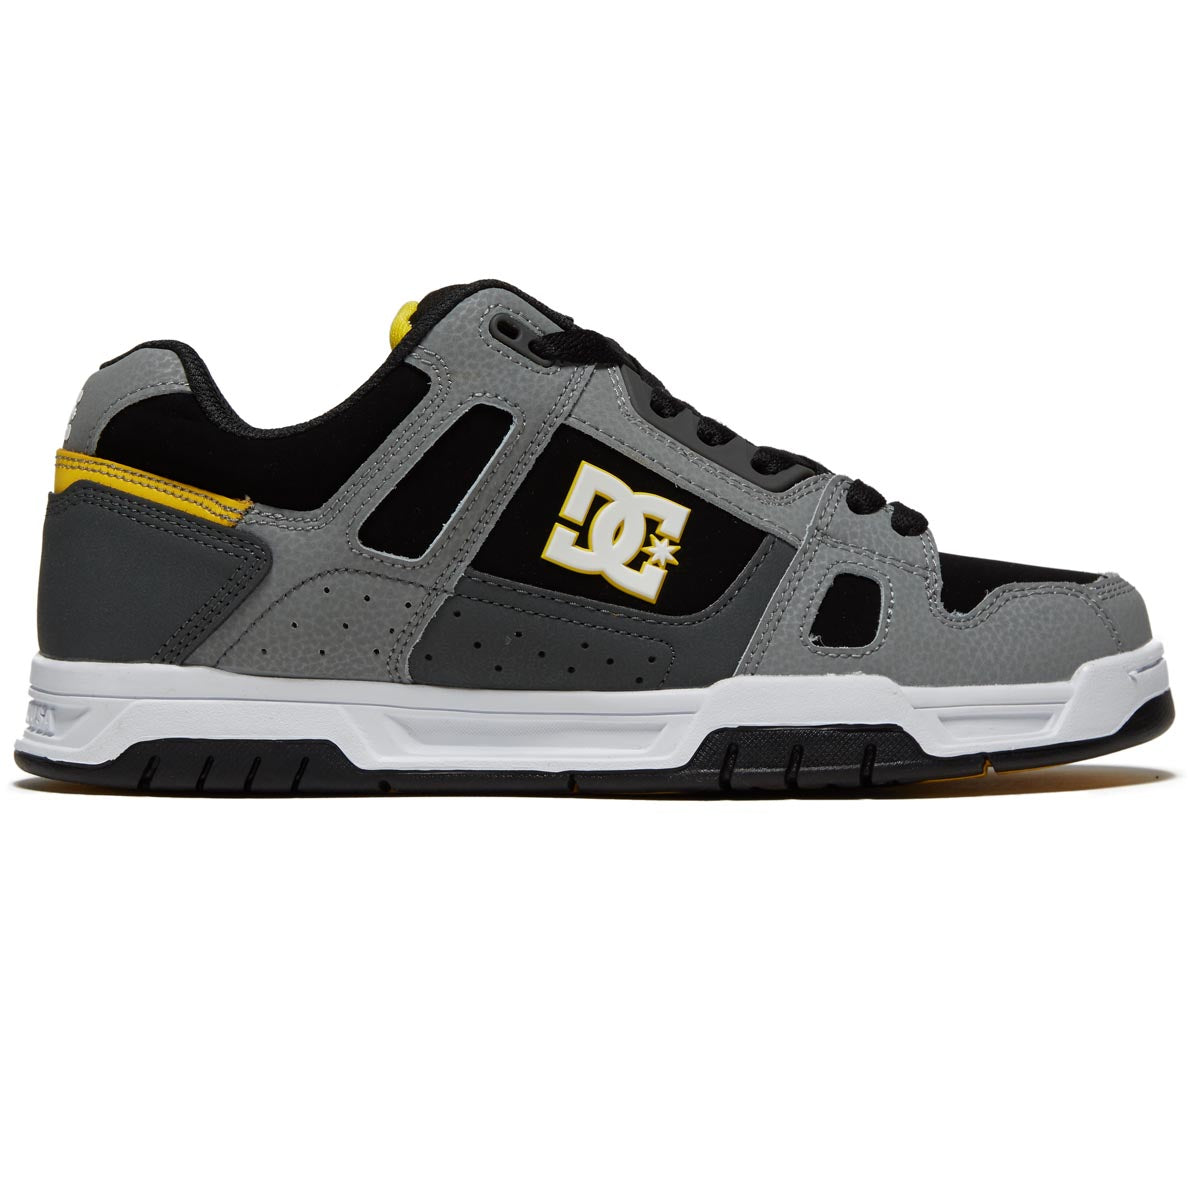 DC Stag Shoes - Grey/Yellow image 1